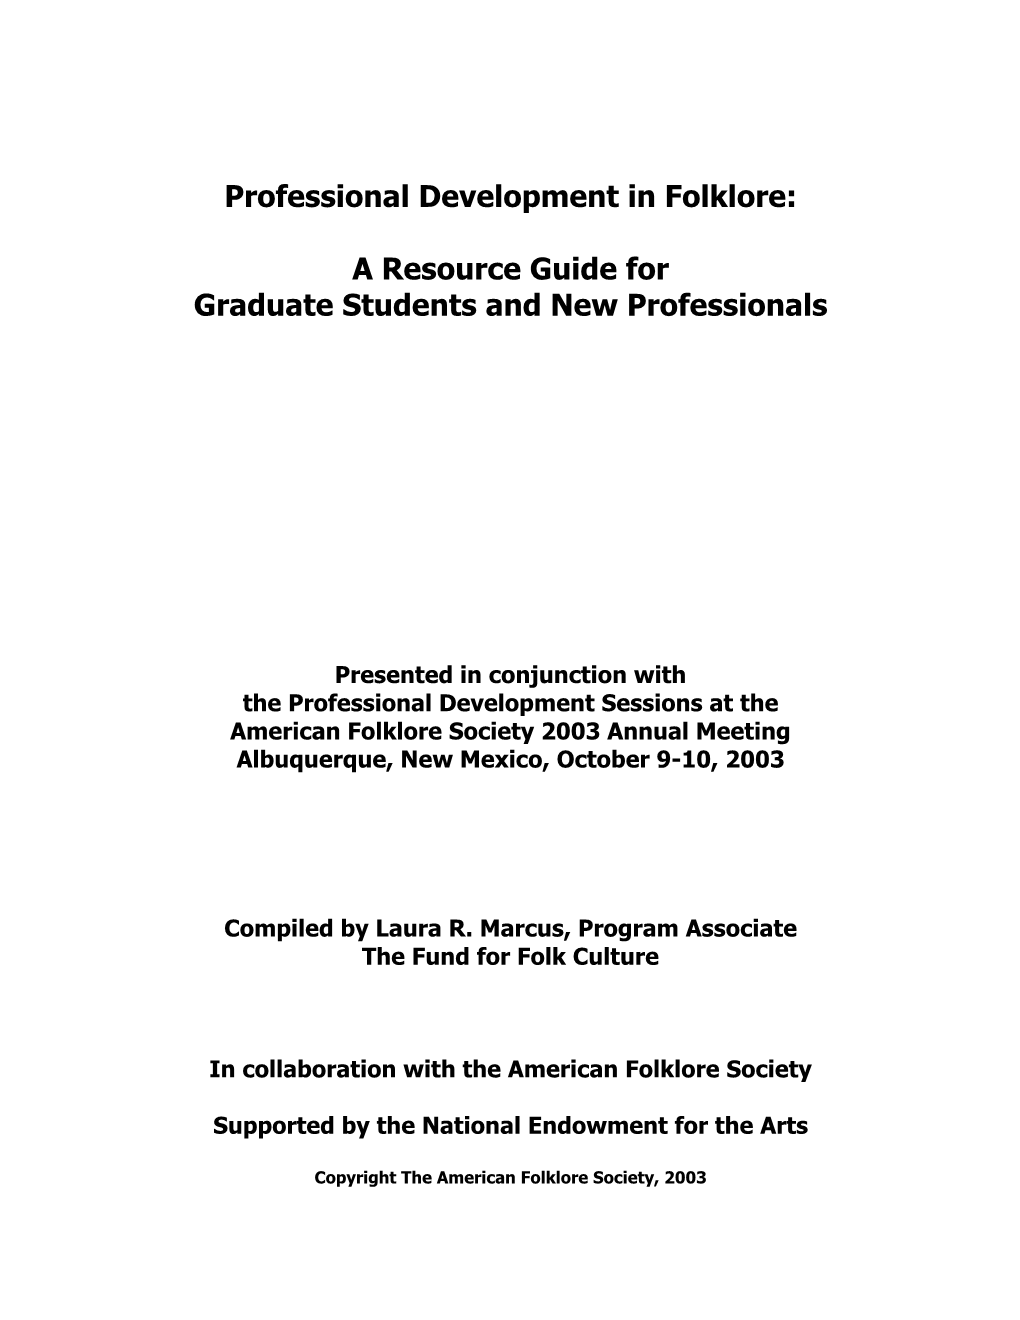 Resource Guide for Graduate Students and New Professionals